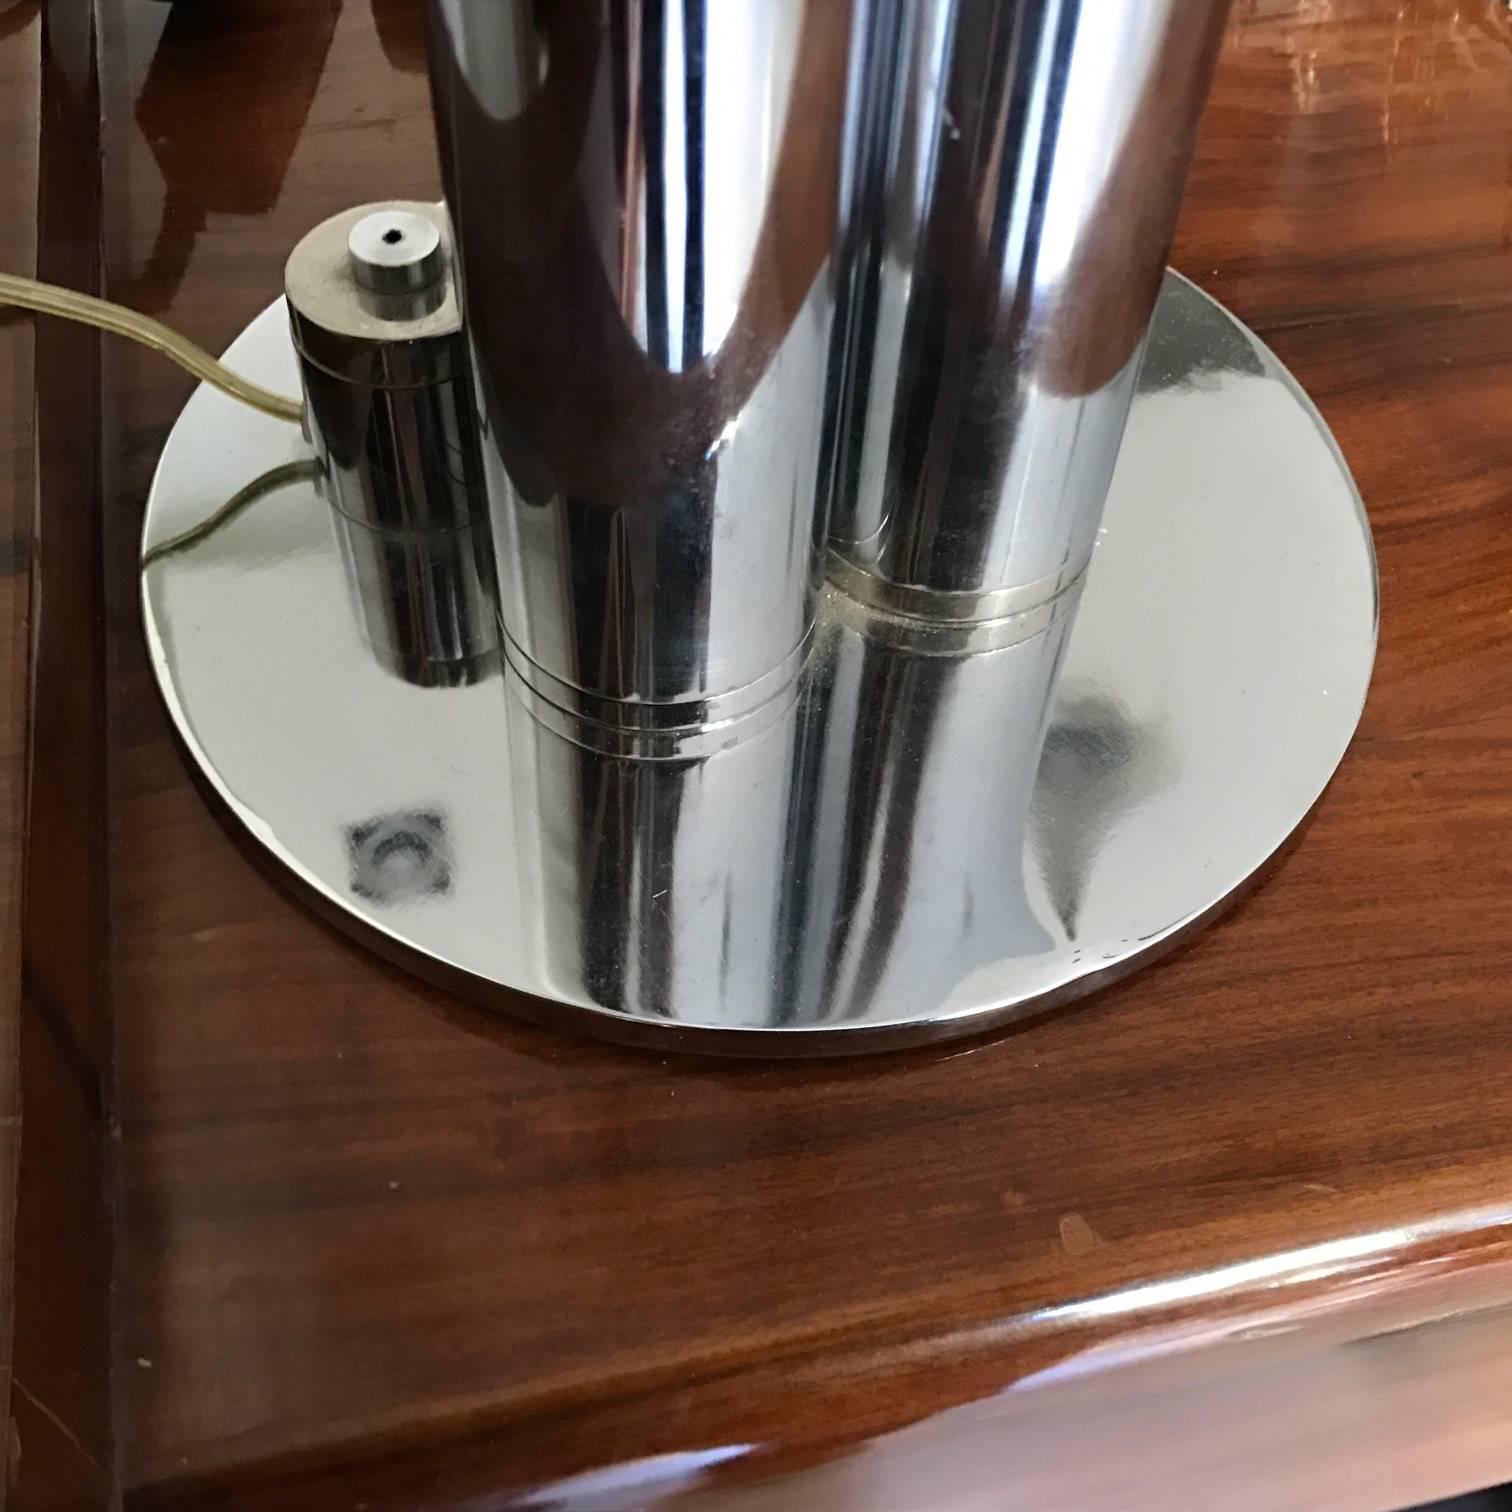 Italian steel table lamp, made in the 1970s in good conditions, the three steel tubes are rotatable to modulate the light.
It works with both 110 and 220 Volt.